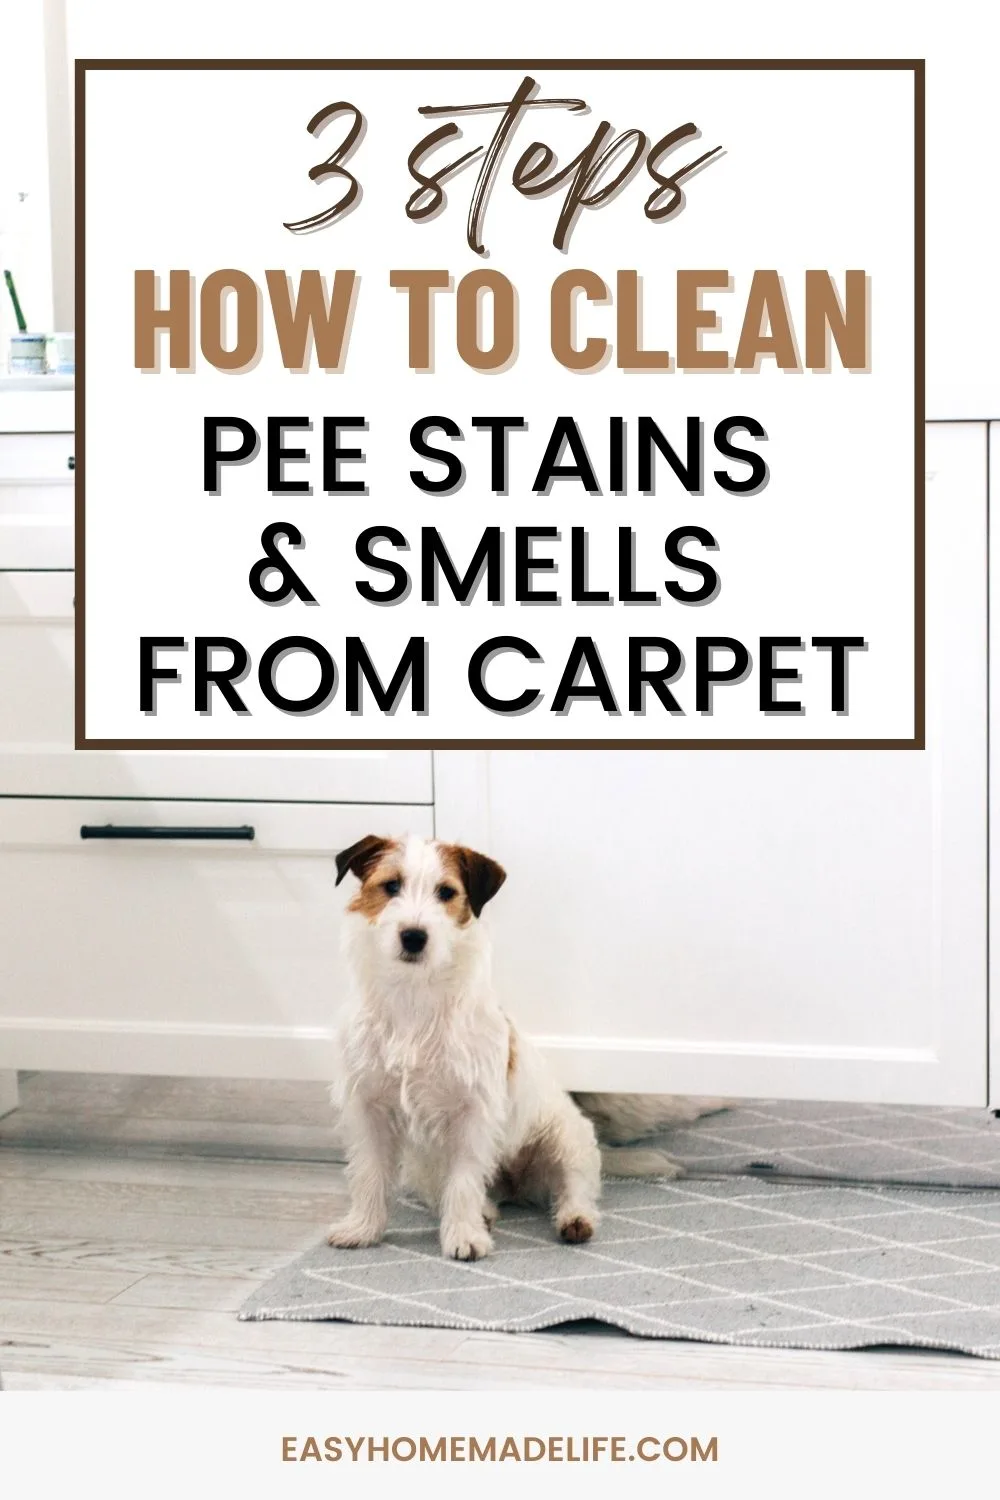 3-steps. How to clean pee stains and smells from carpet.